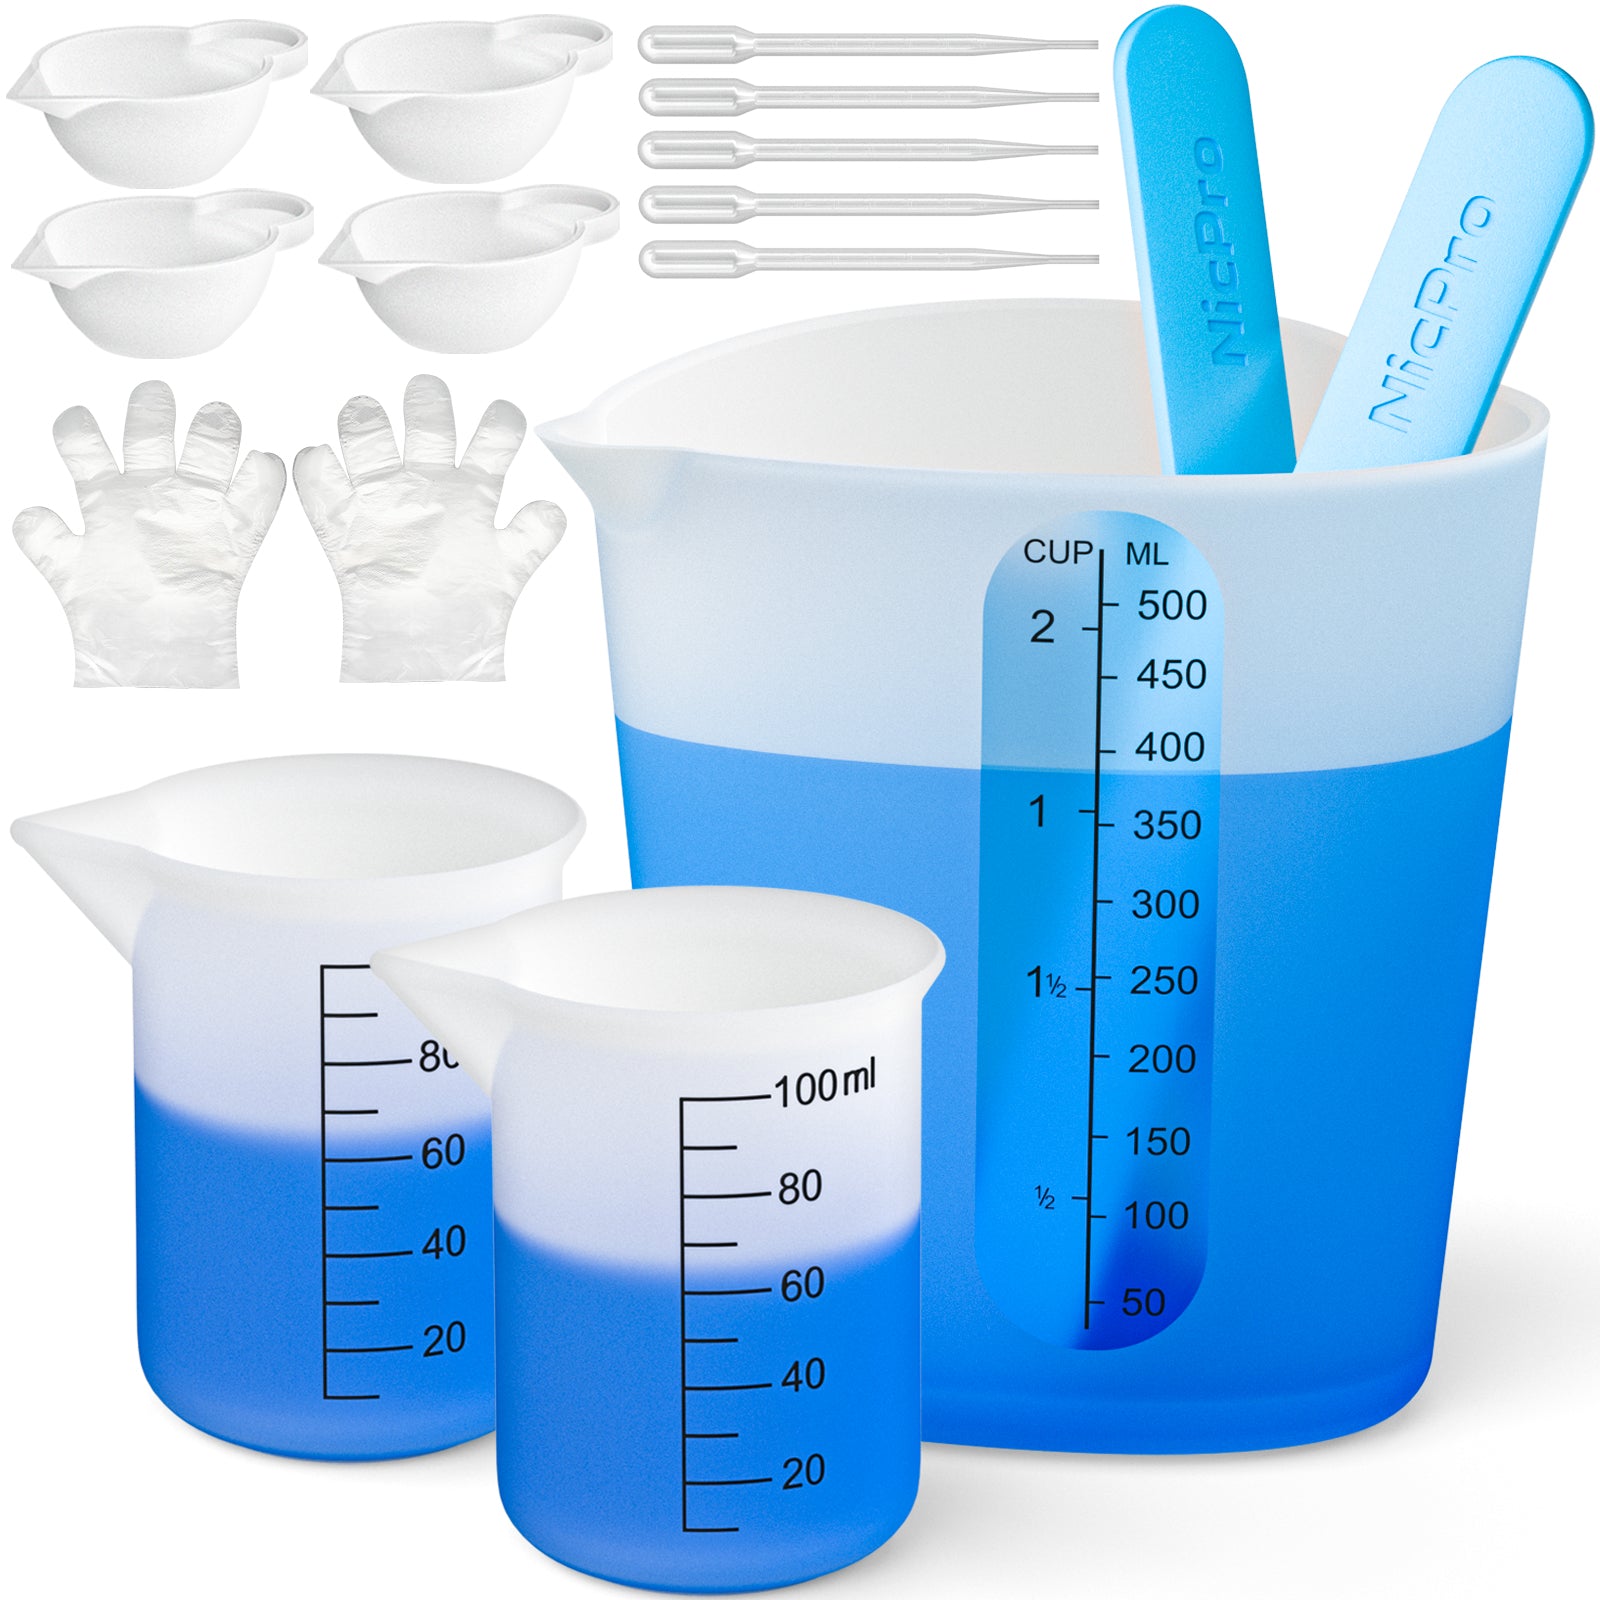 Large Resin Silicone Measuring Cups Tool Set, Nicpro Heart Shape 500ml &100ml Measure Cups, Silicone Stir Sticks, Pipettes, Gloves for Epoxy Resin Mixing, Molds, Jewelry Making, Waxing, Easy Clean